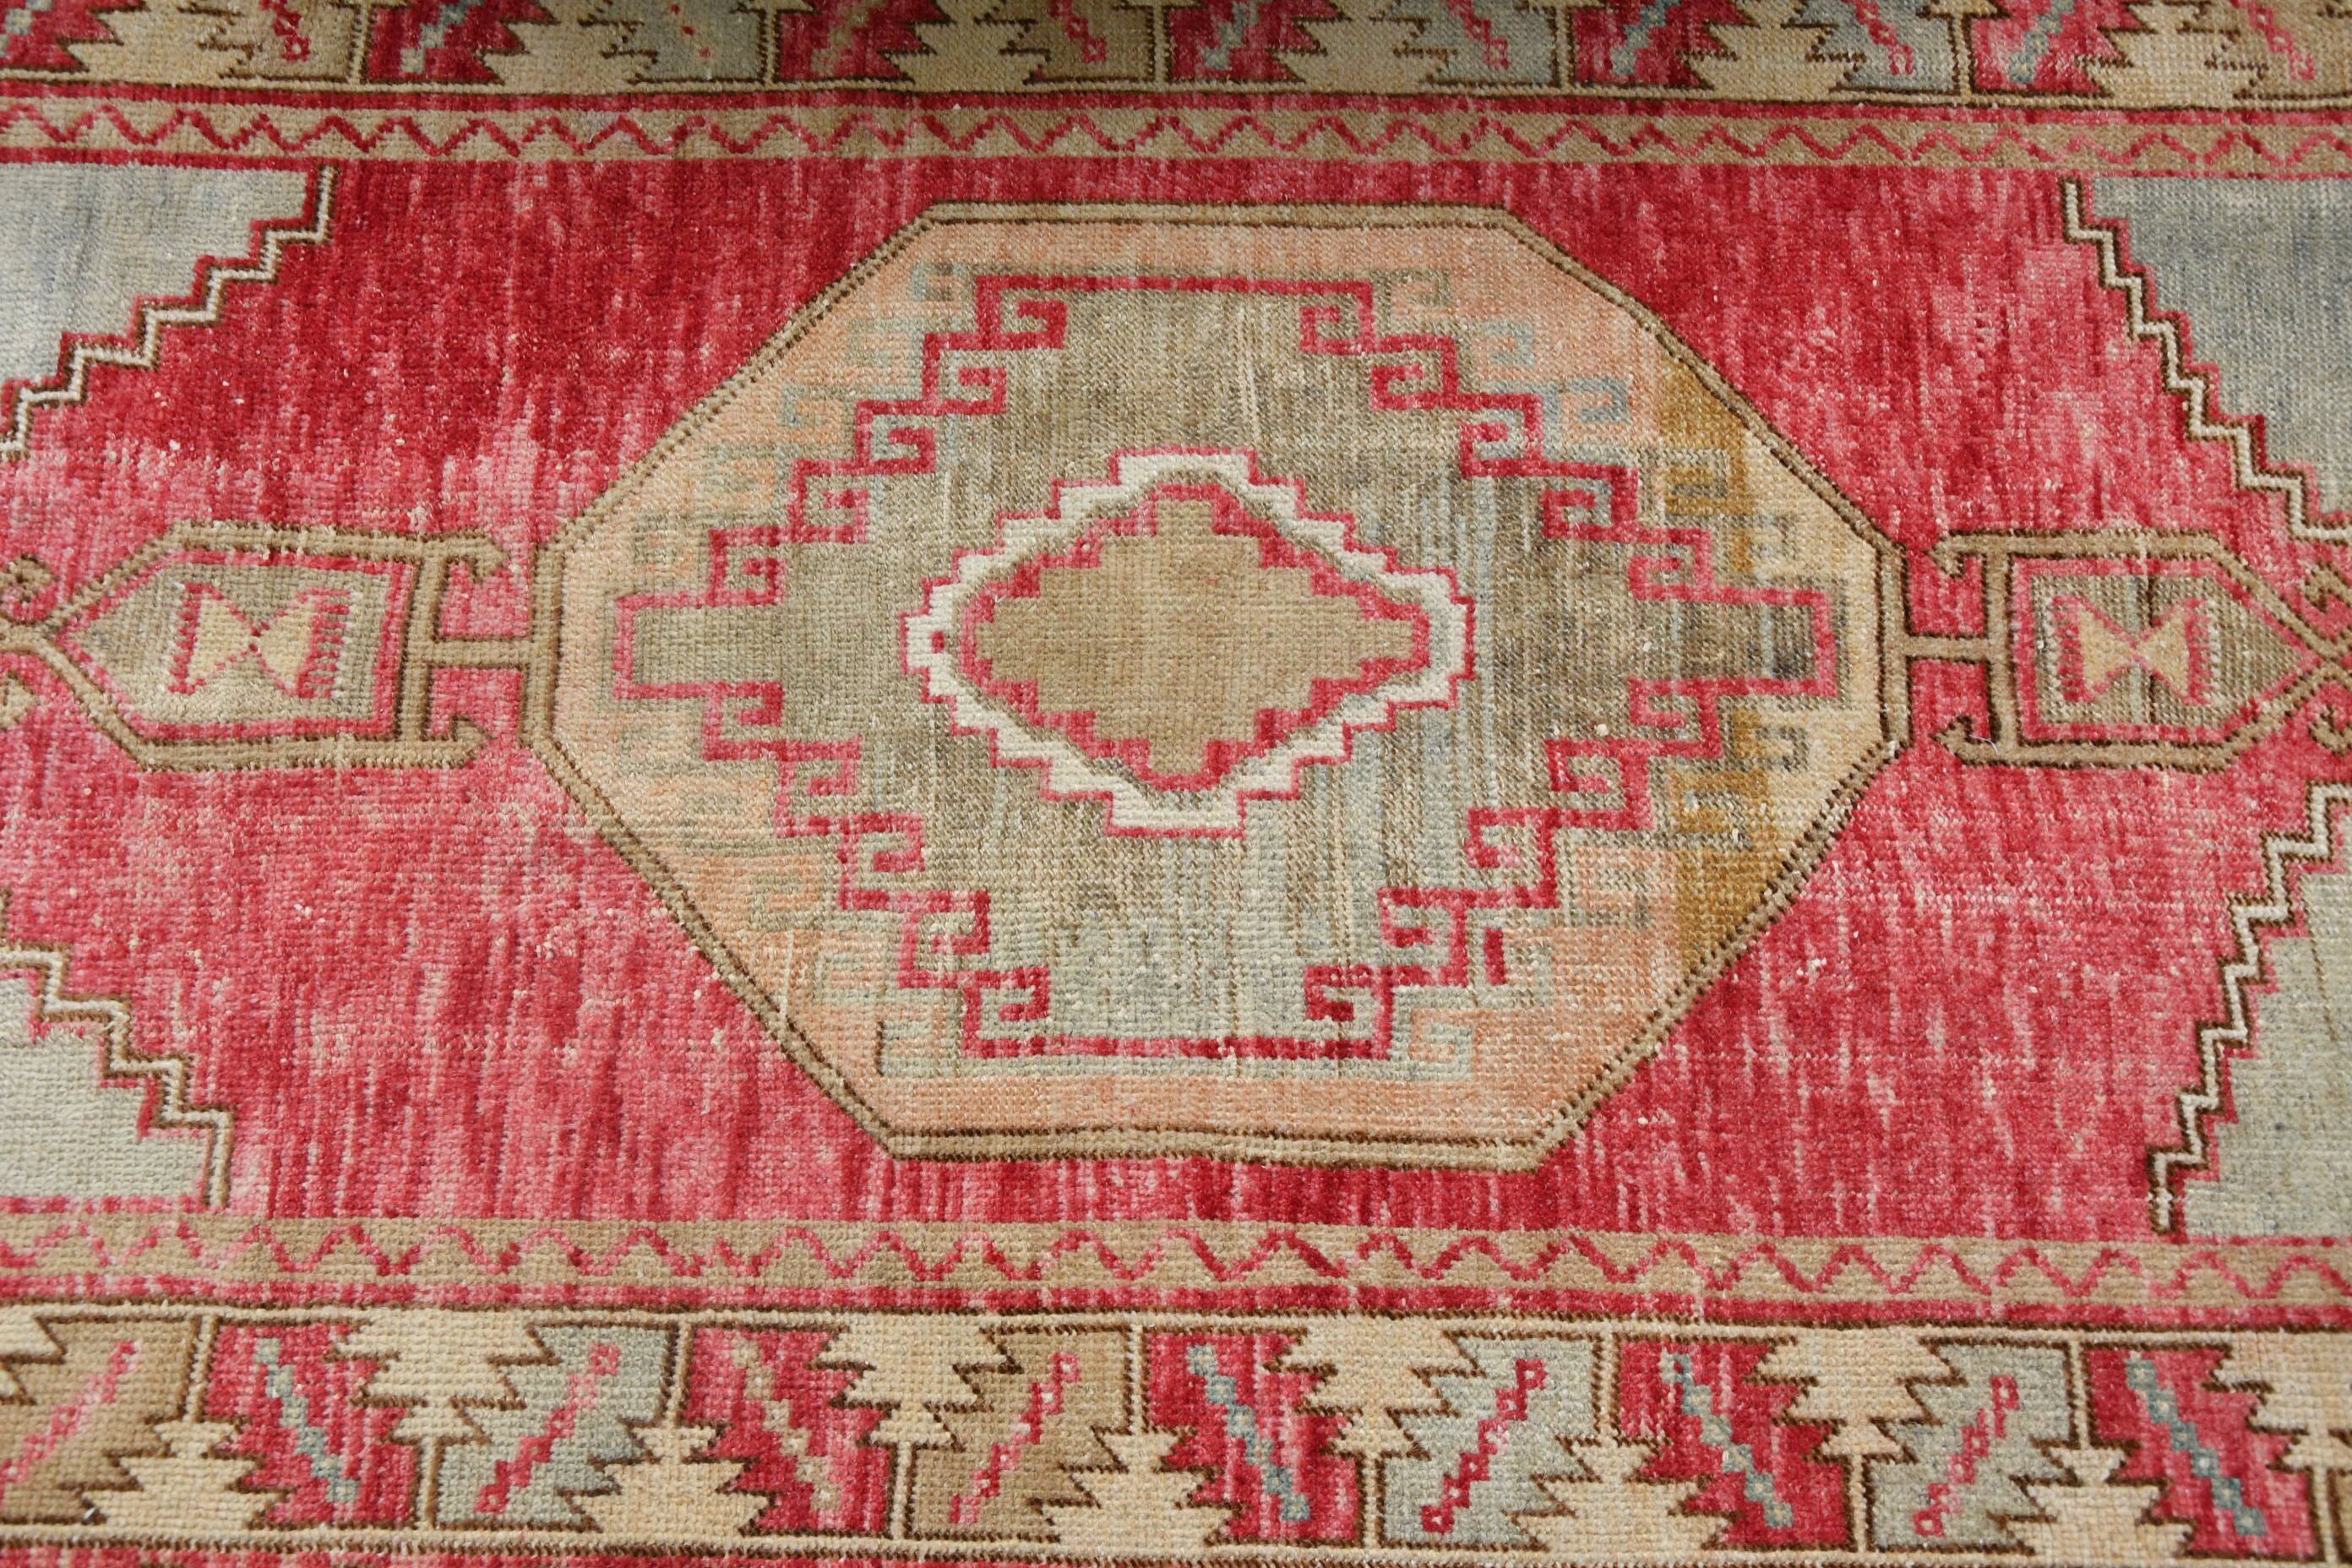 Vintage Rugs, Bedroom Rug, Vintage Decor Rug, Rugs for Entry, Turkish Rug, 3.2x5.2 ft Accent Rug, Moroccan Rug, Cool Rugs, Kitchen Rugs